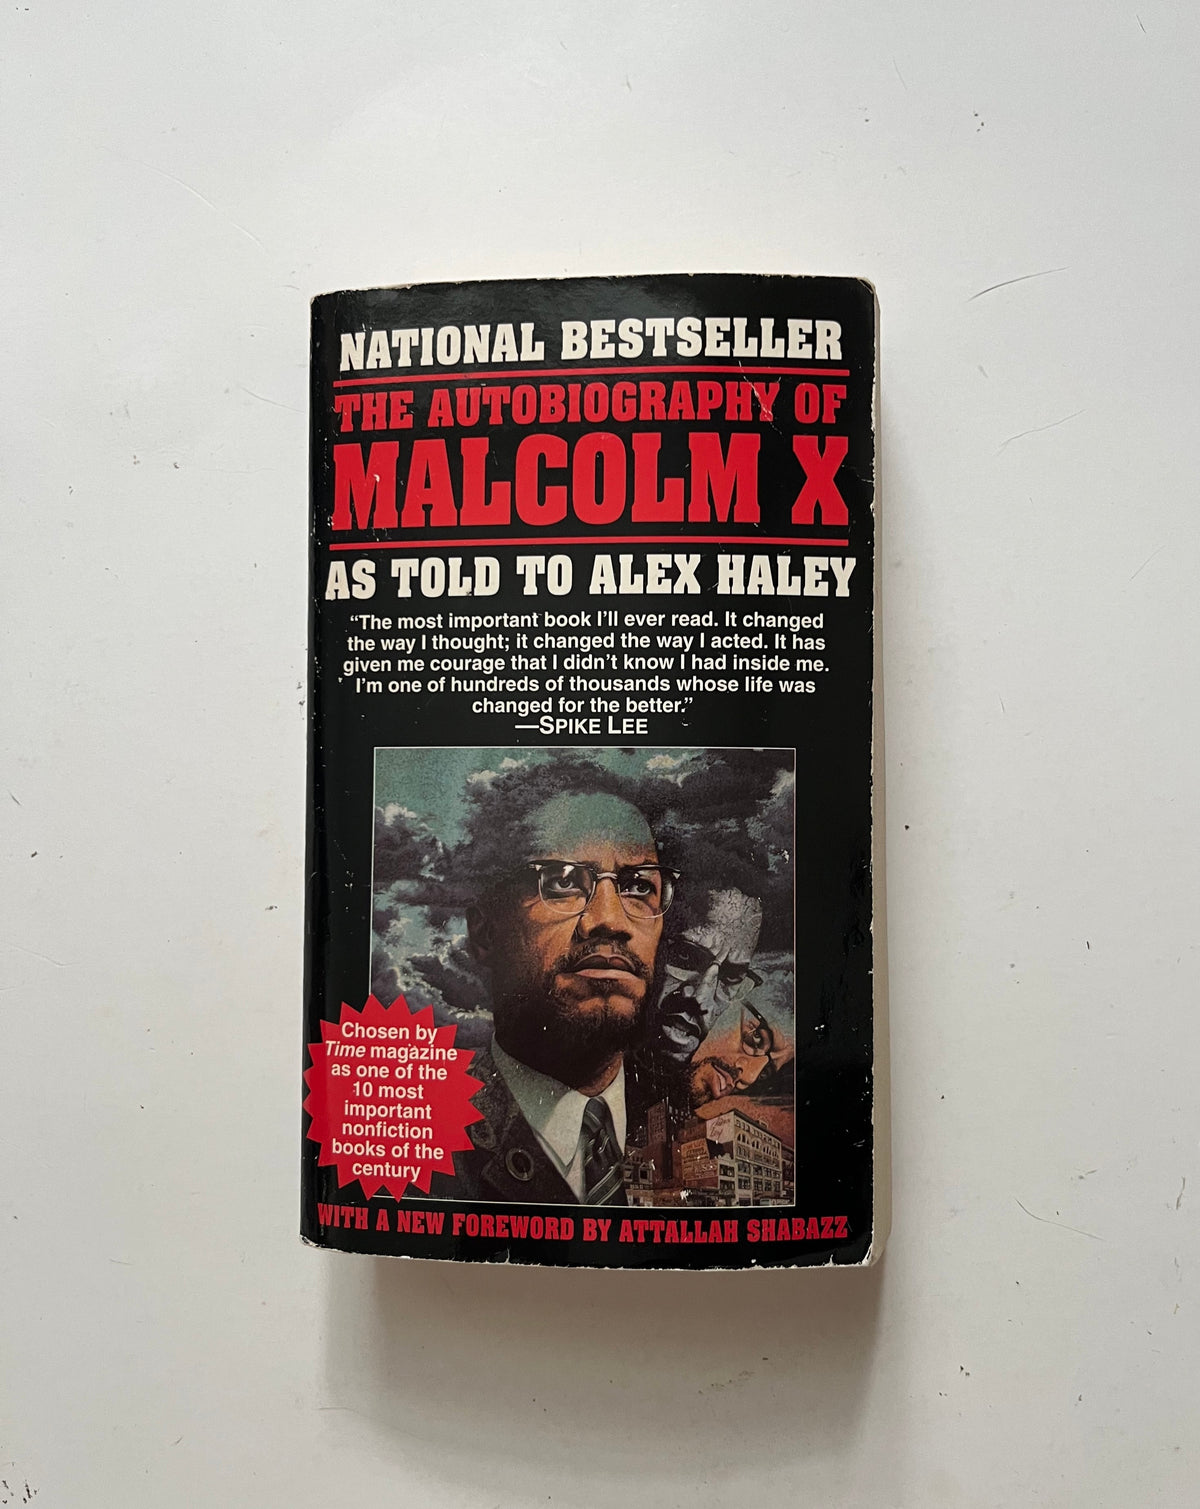 The Autobiography of Malcolm X co-written with Alex Haley